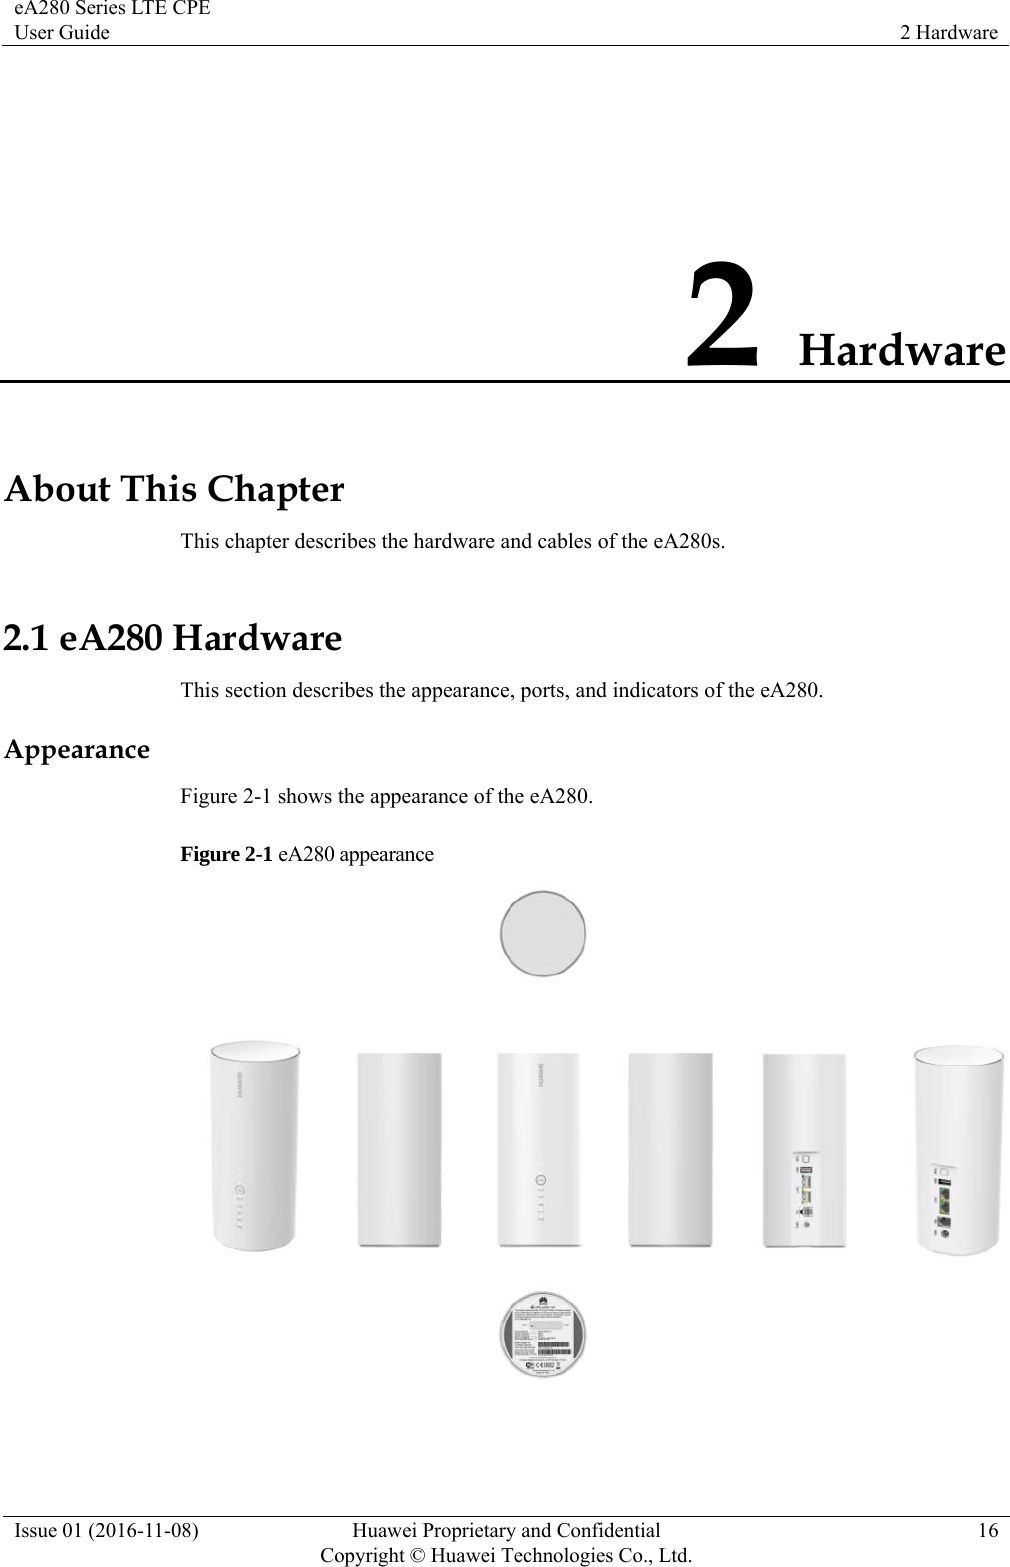 eA280 Series LTE CPE User Guide  2 Hardware Issue 01 (2016-11-08)  Huawei Proprietary and Confidential         Copyright © Huawei Technologies Co., Ltd.16 2 Hardware About This Chapter This chapter describes the hardware and cables of the eA280s. 2.1 eA280 Hardware This section describes the appearance, ports, and indicators of the eA280. Appearance Figure 2-1 shows the appearance of the eA280. Figure 2-1 eA280 appearance   